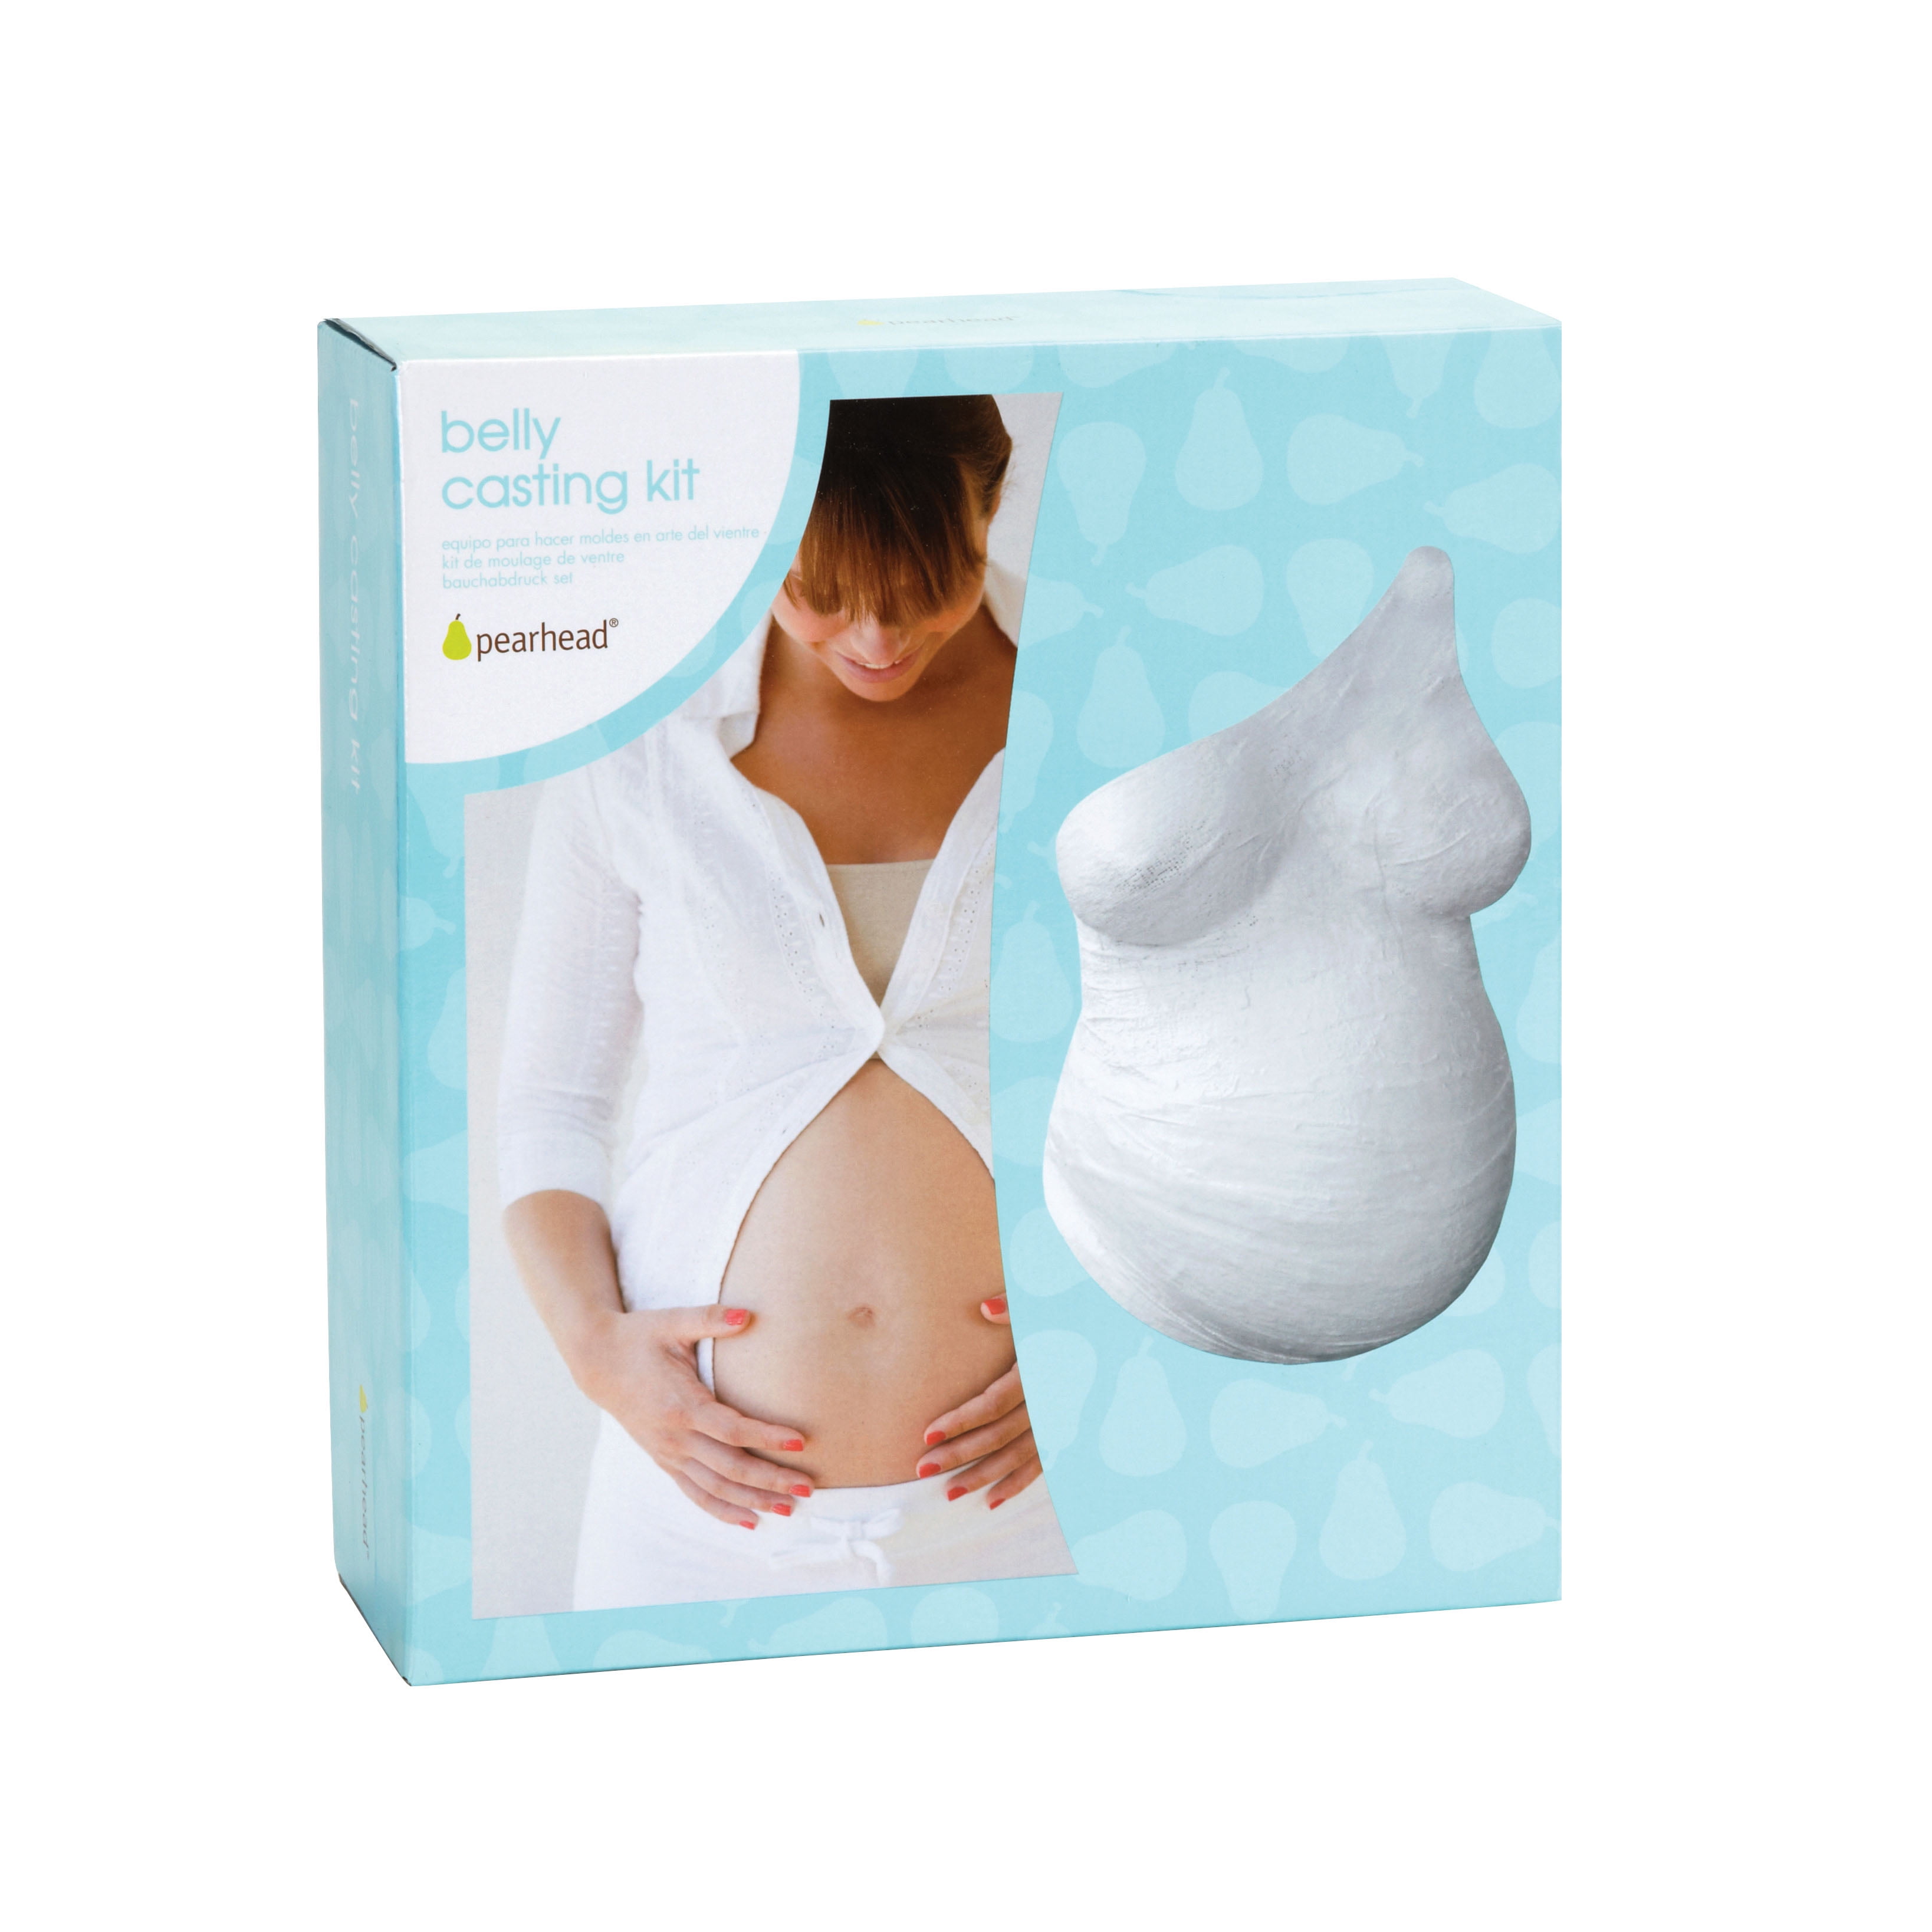 Belly Cast Belly Casting Kit For Decor Pregnancy Belly Mold Casting Kit  Unique Keepsake Plaster Gauze Bandage For Expecting - AliExpress